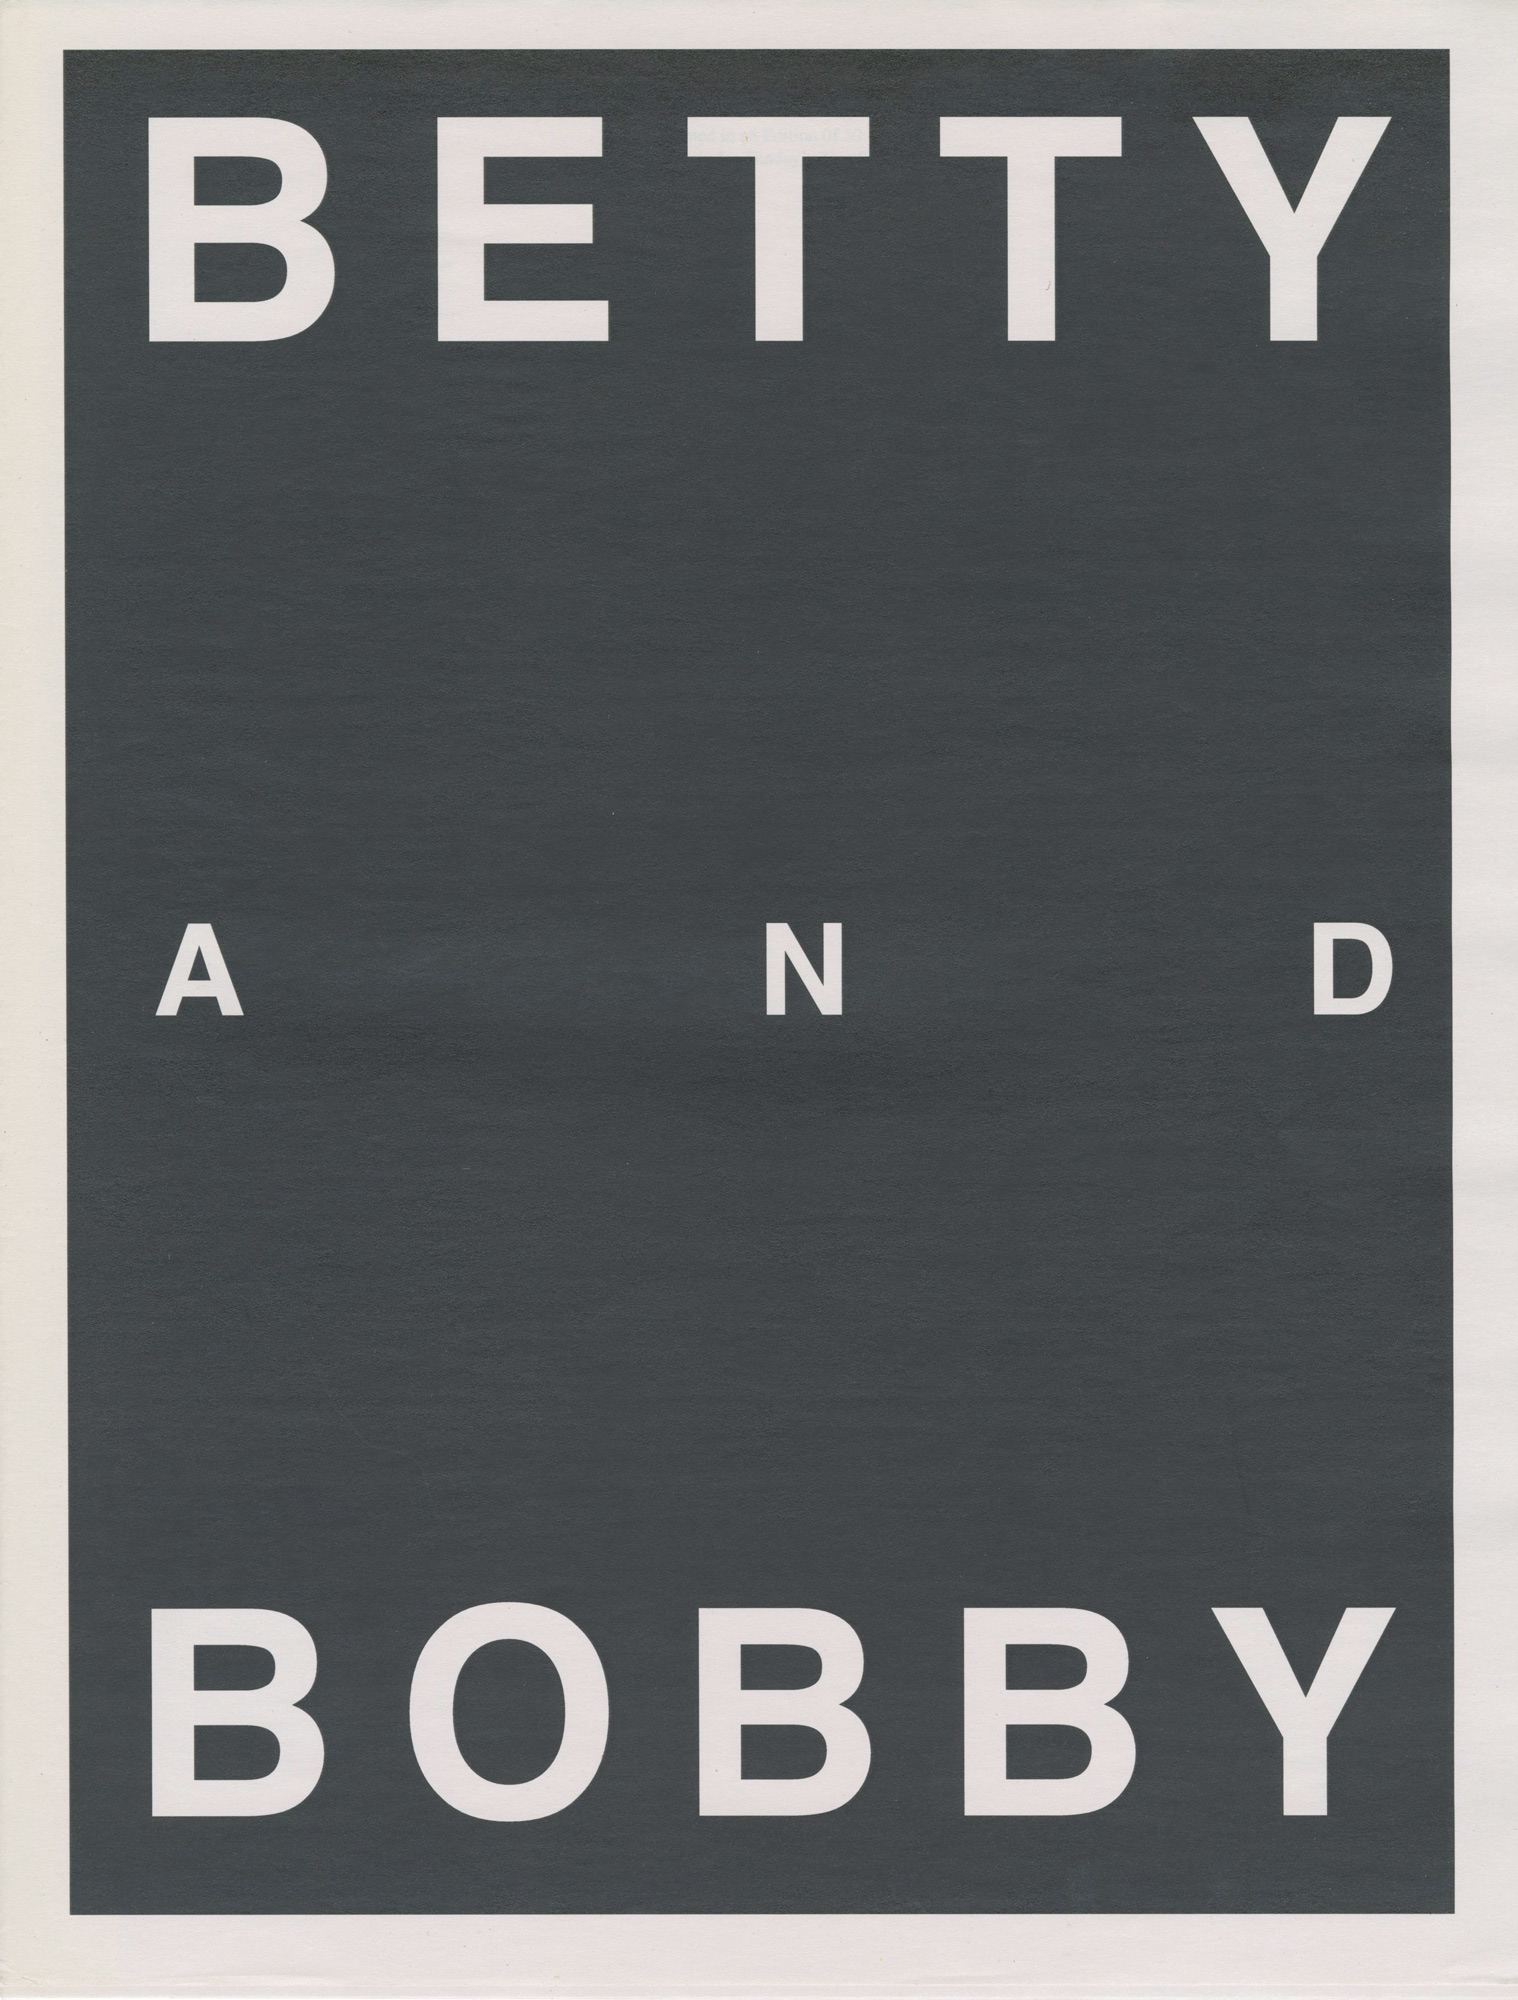 Betty and Bobby